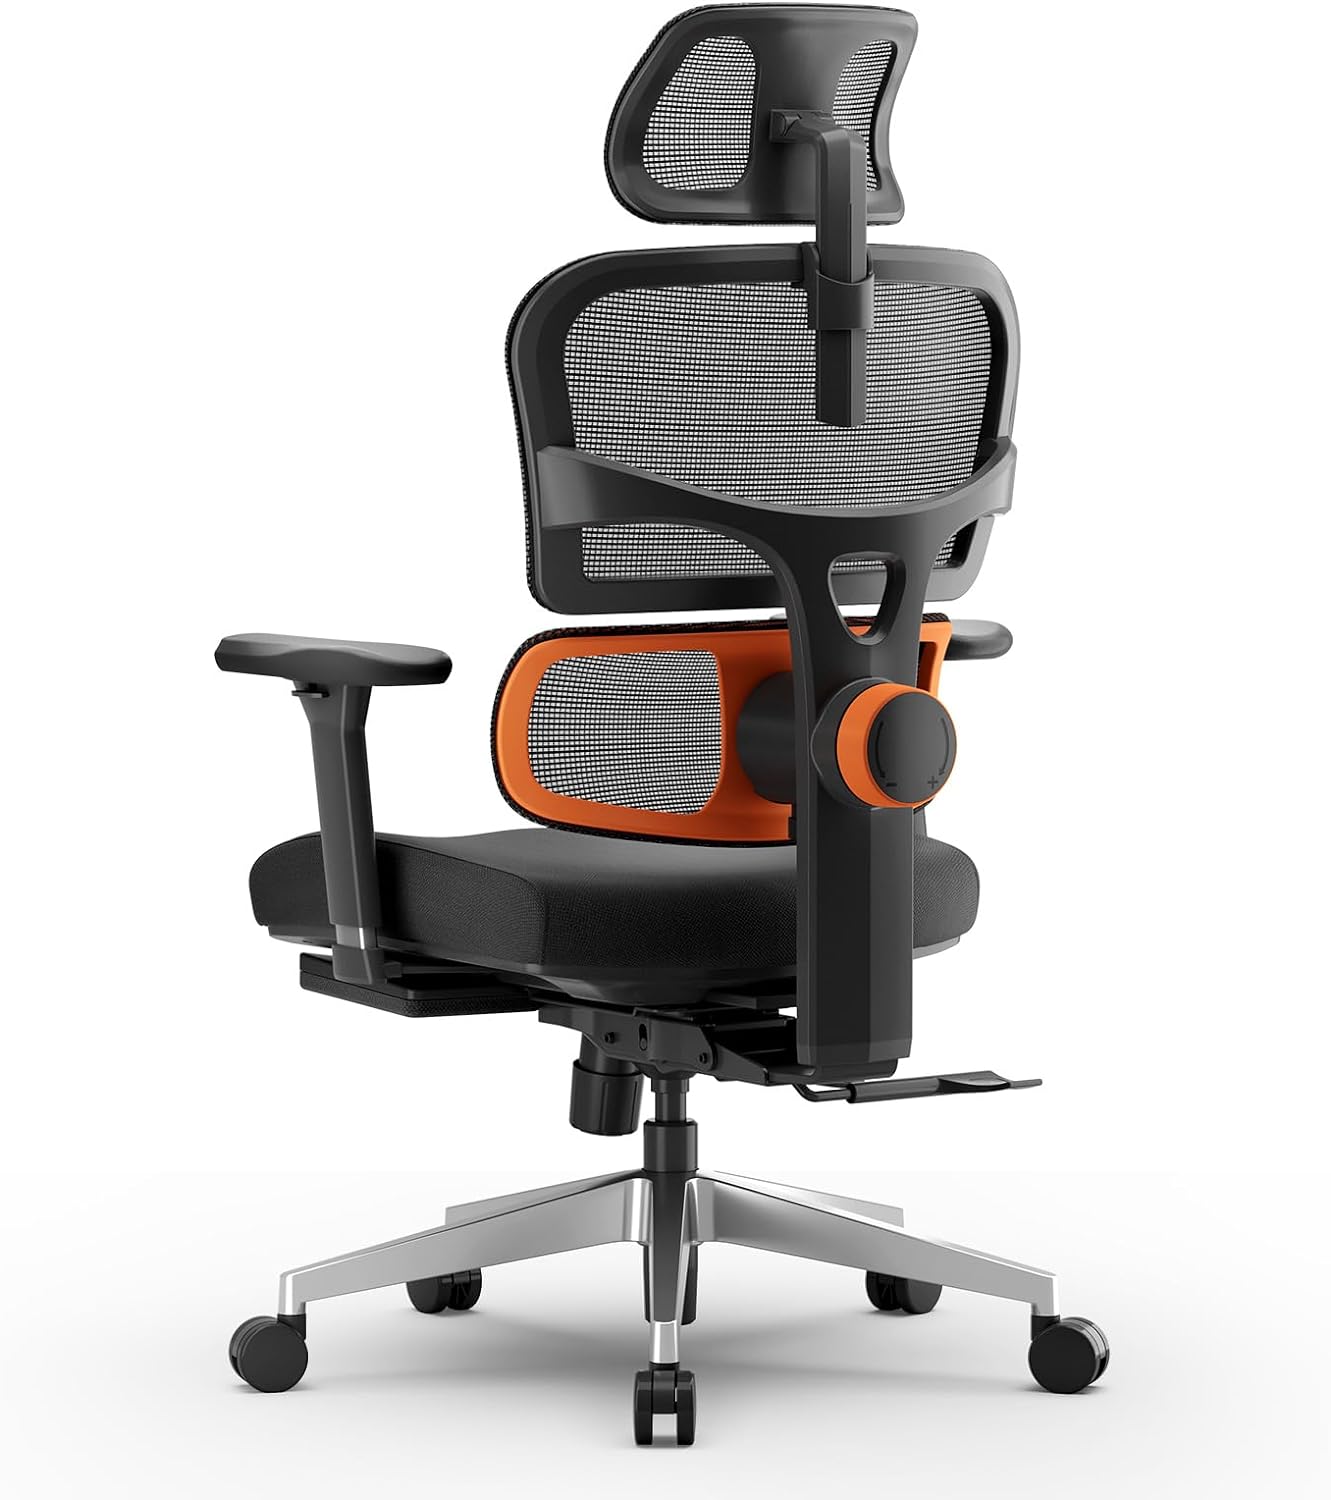 Newtral Ergonomic Office Chair with Footrest - High Back Computer Chair with Auto-Following Lumbar Support, 4D Armrest, Seat Depth & Height Adjustable, Tilt Lockable for Home & Office